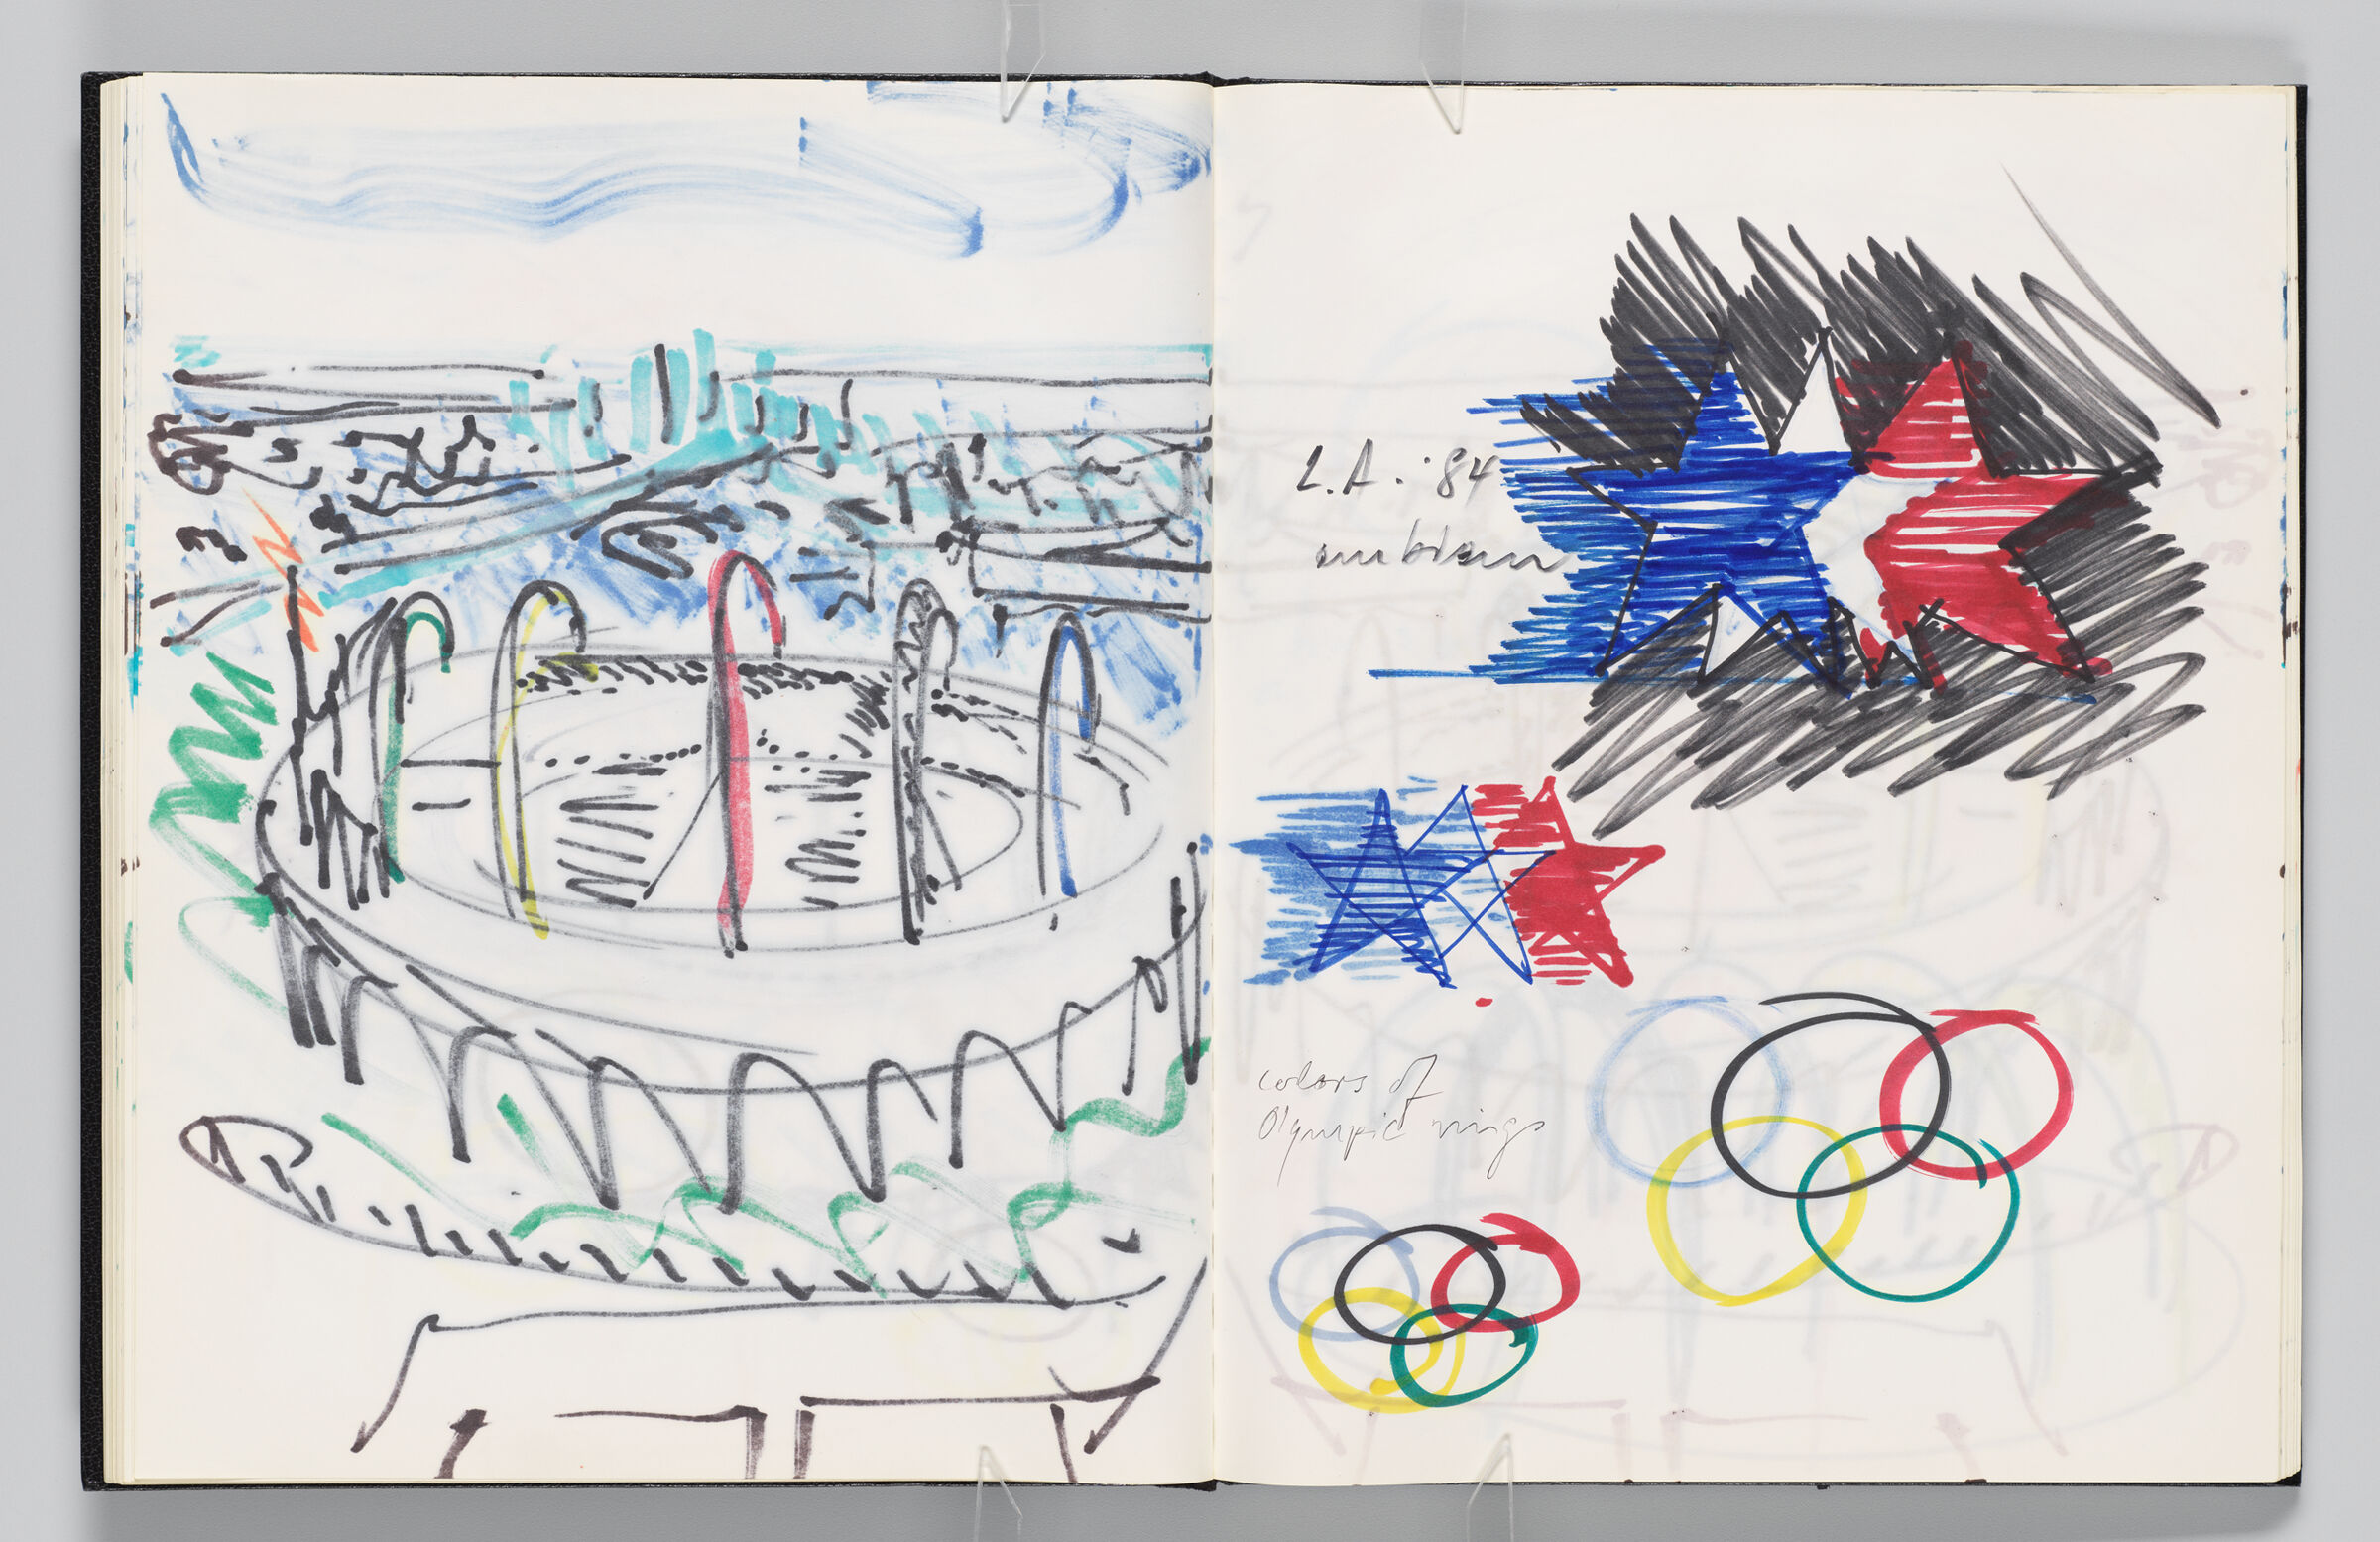 Untitled (Bleed-Through Of Previous Page, Left Page); Untitled (Olympic Emblem And Rings With Color Transfer, Right Page)